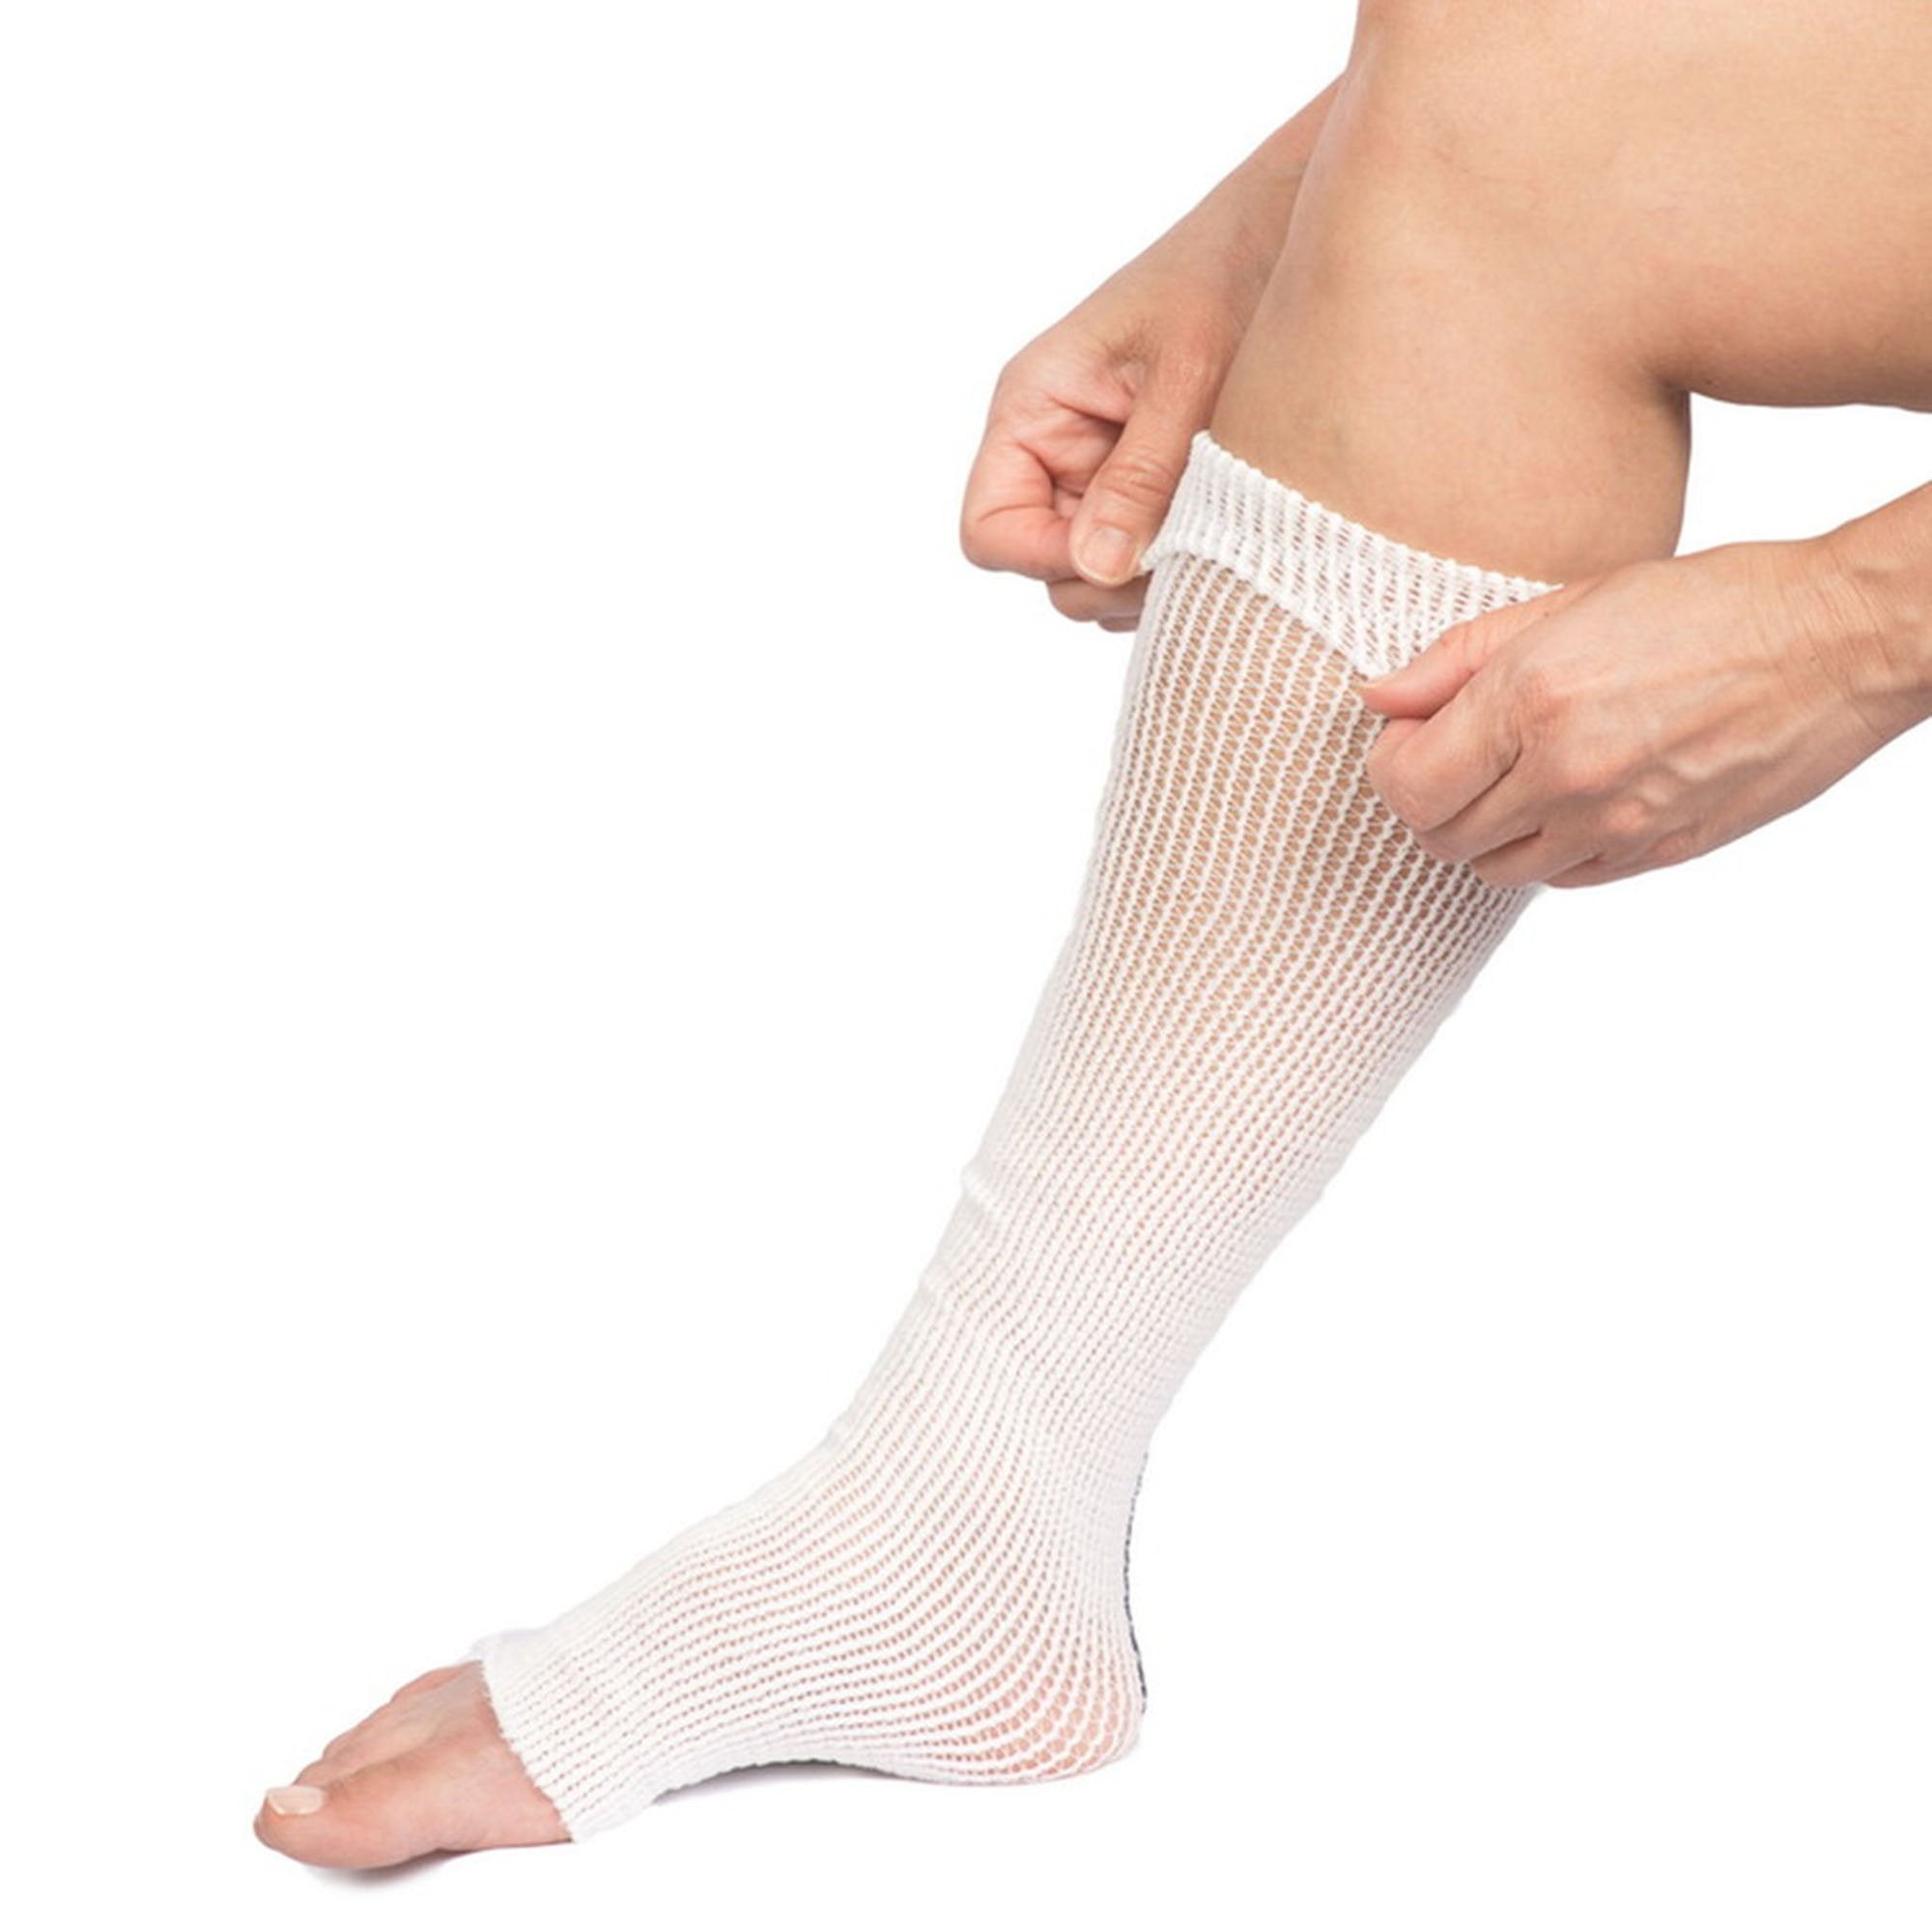 Compression Stockinette EdemaWear Small White Wrist to Shoulder / Foot to Knee